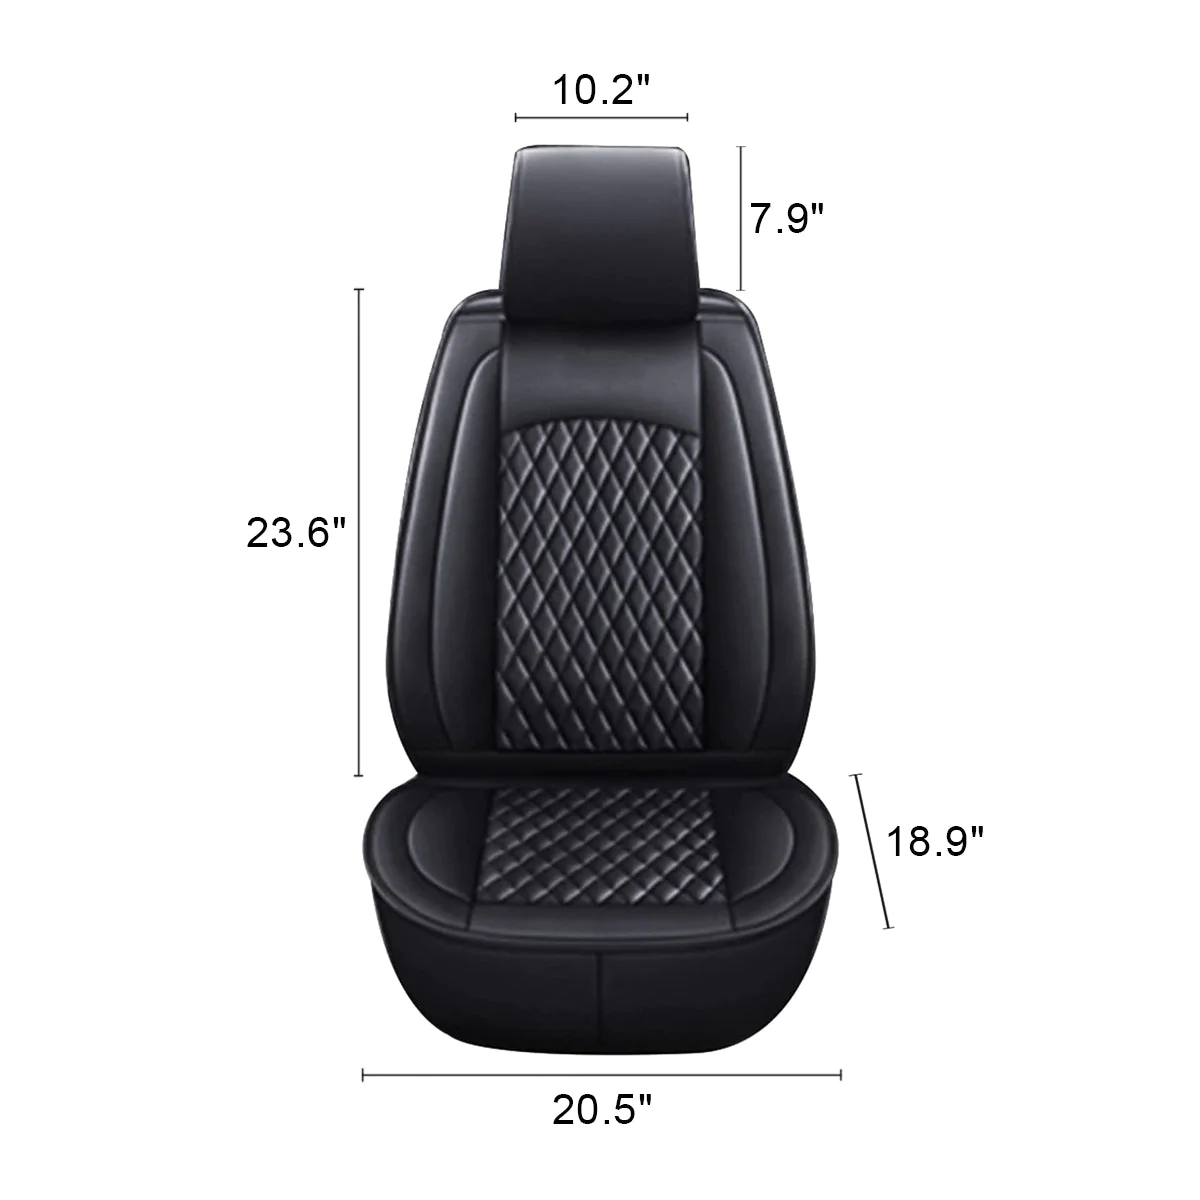 Custom Text For Seat Covers 5 Seats Full Set, Custom Fit For Your Cars, Leatherette Automotive Seat Cushion Protector Universal Fit, Vehicle Auto Interior Decor PU13988